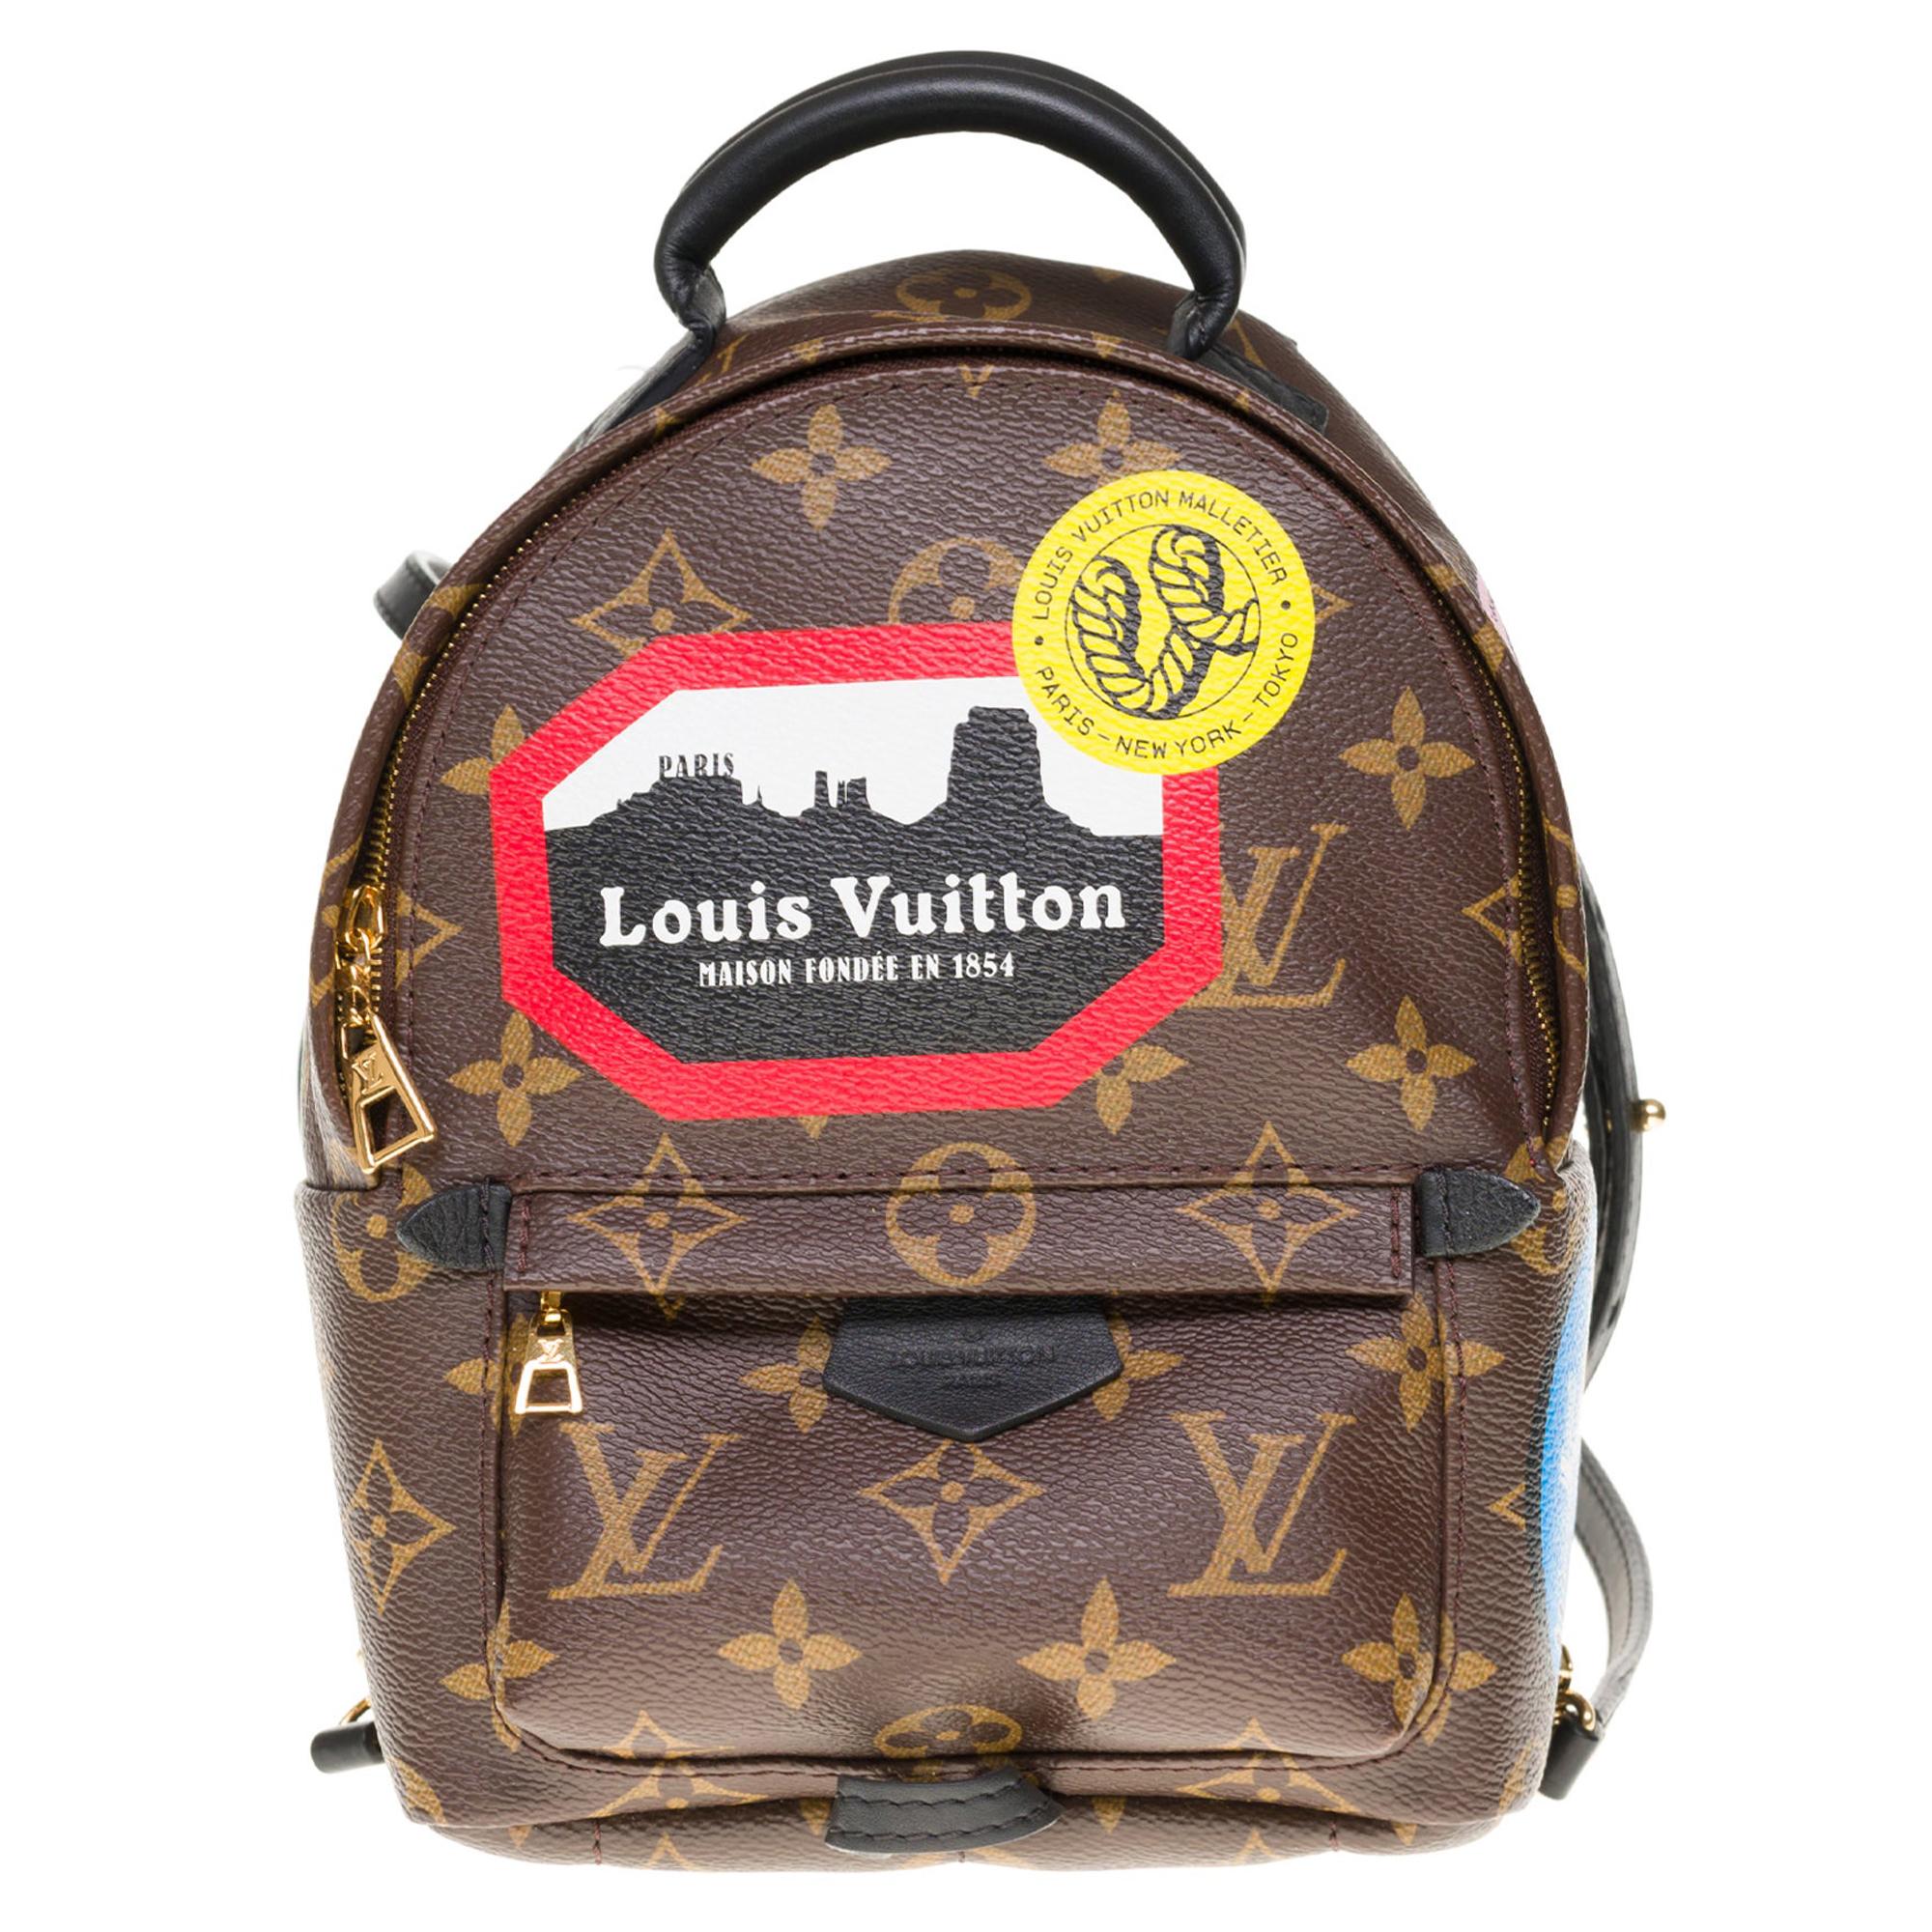 Brand New-Sold Out- Louis Vuitton Palm Springs Mini Backpack My LV World Tour